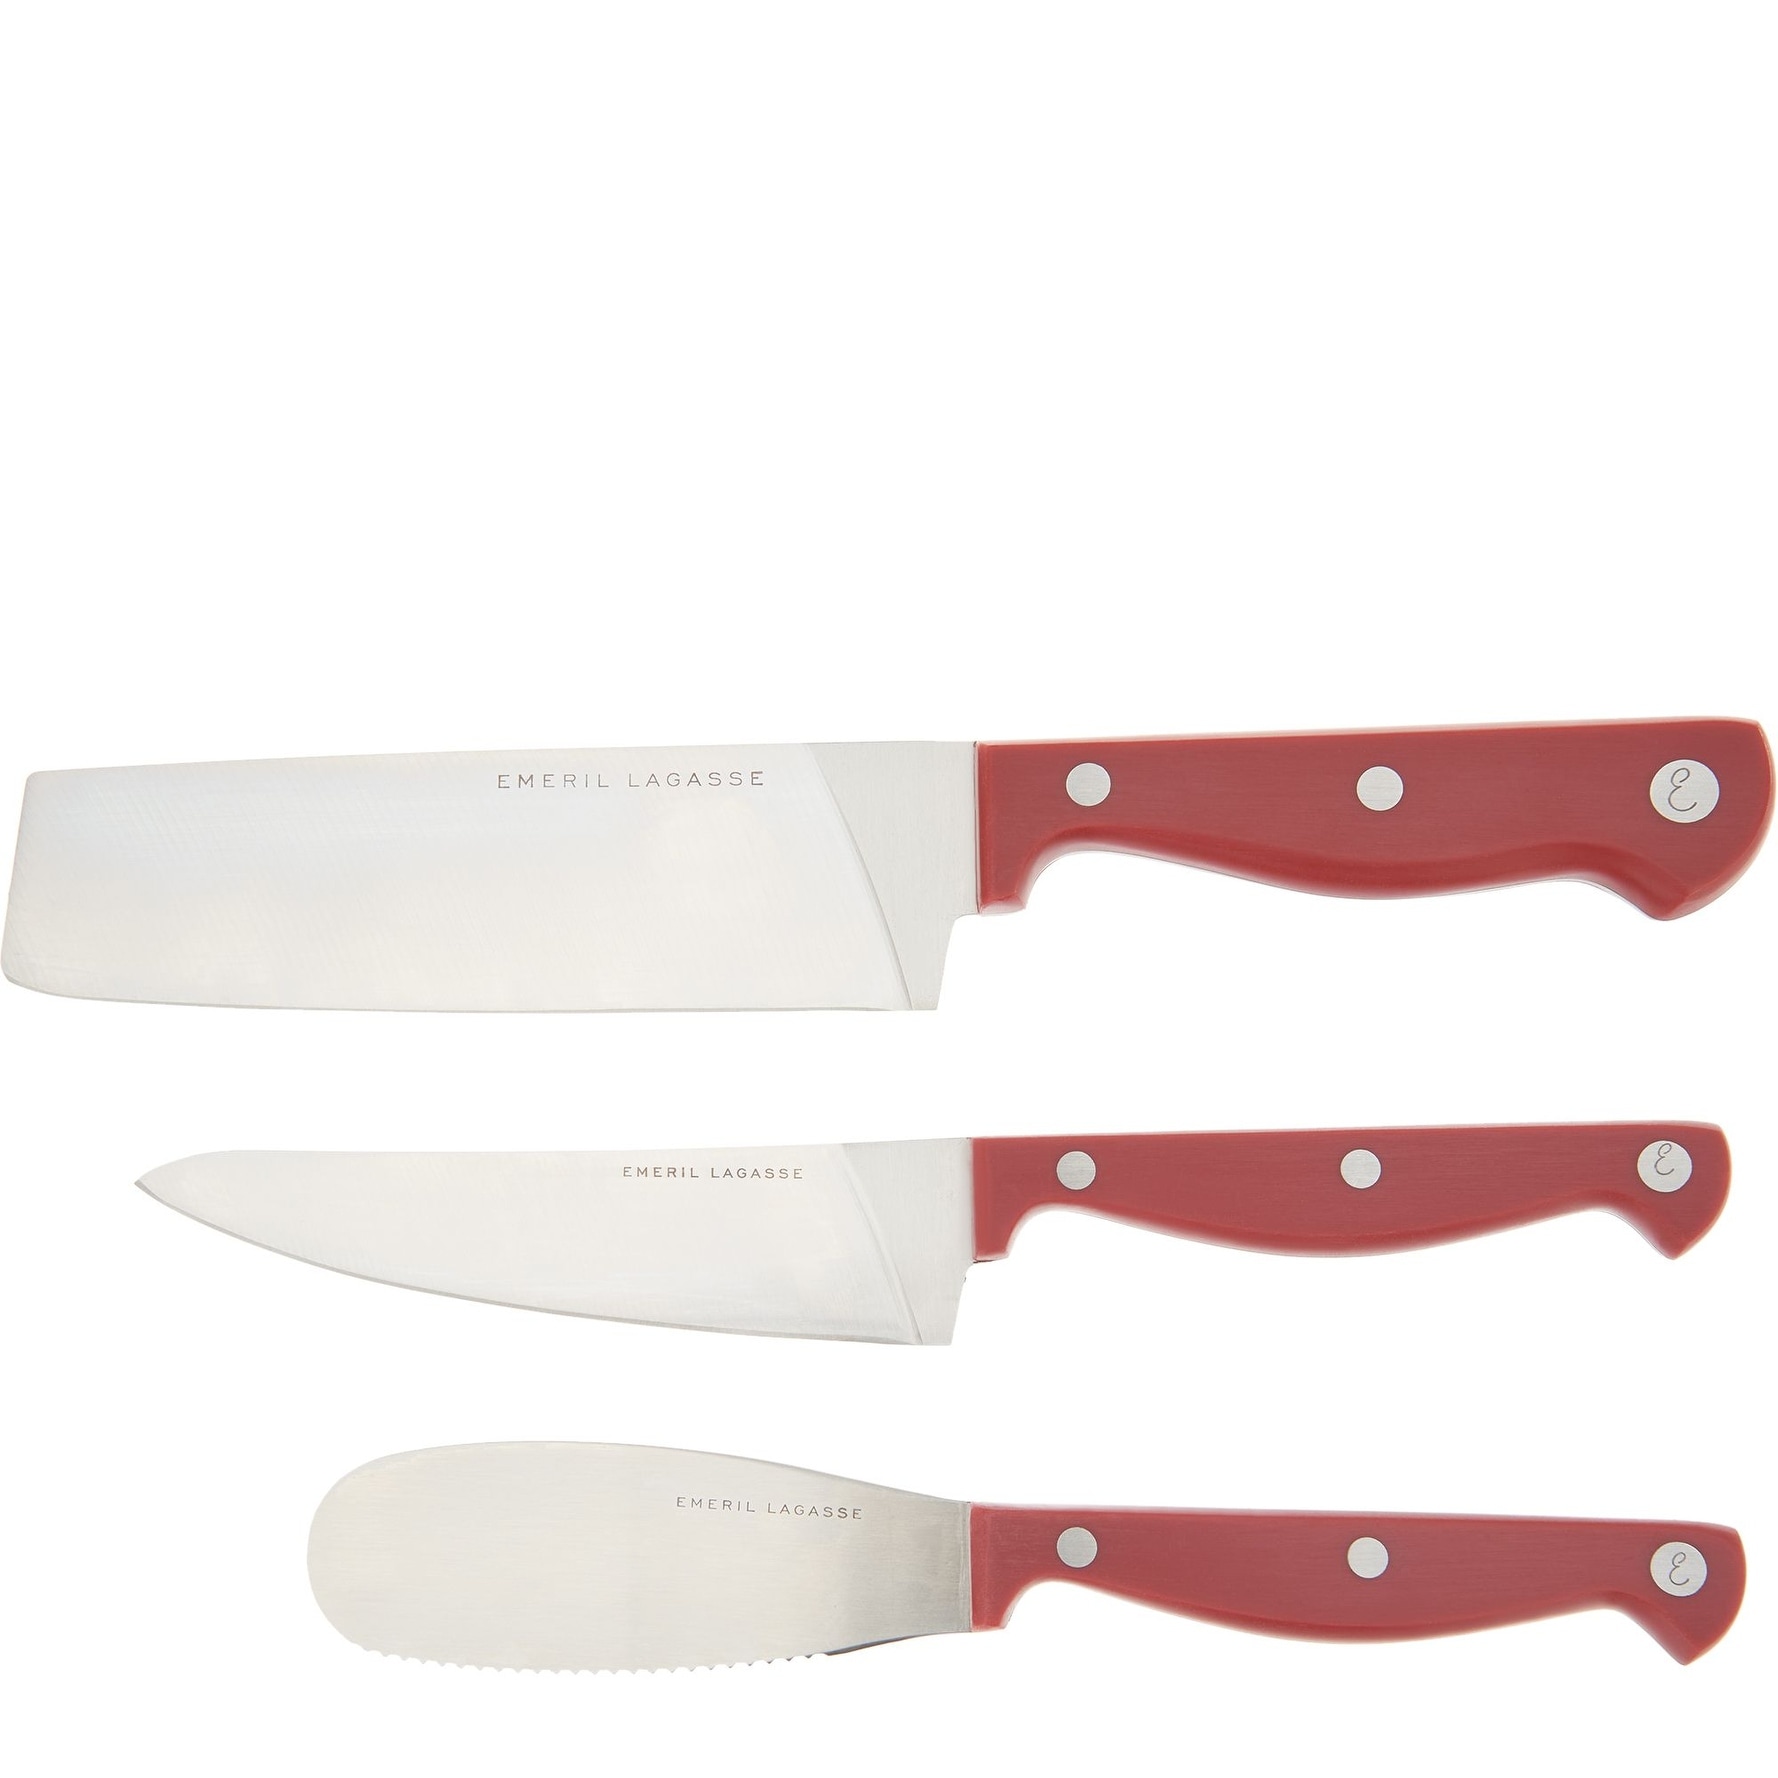 https://ak1.ostkcdn.com/images/products/is/images/direct/a0a62dcd061f3b257edb47f9518700a7c79d29a6/Emeril-3-Piece-Specialty-Cutlery-Set-Model-K48364.jpg